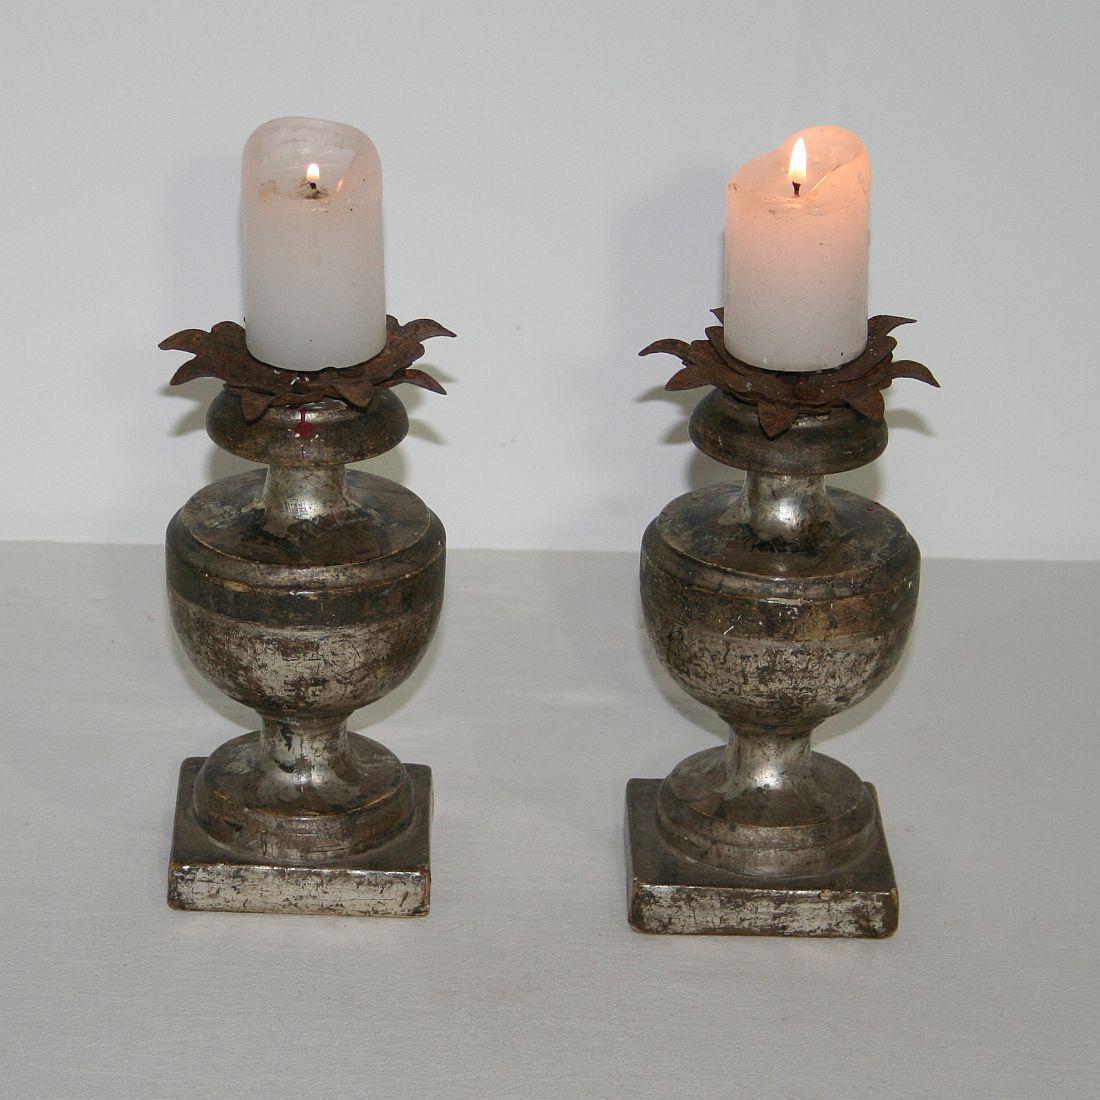 Great pair of small wooden candleholders with their original silver.
This type of candleholder you see more often gilded but in silver they are rare.
Italy, circa 1780-1800. 
Weathered.